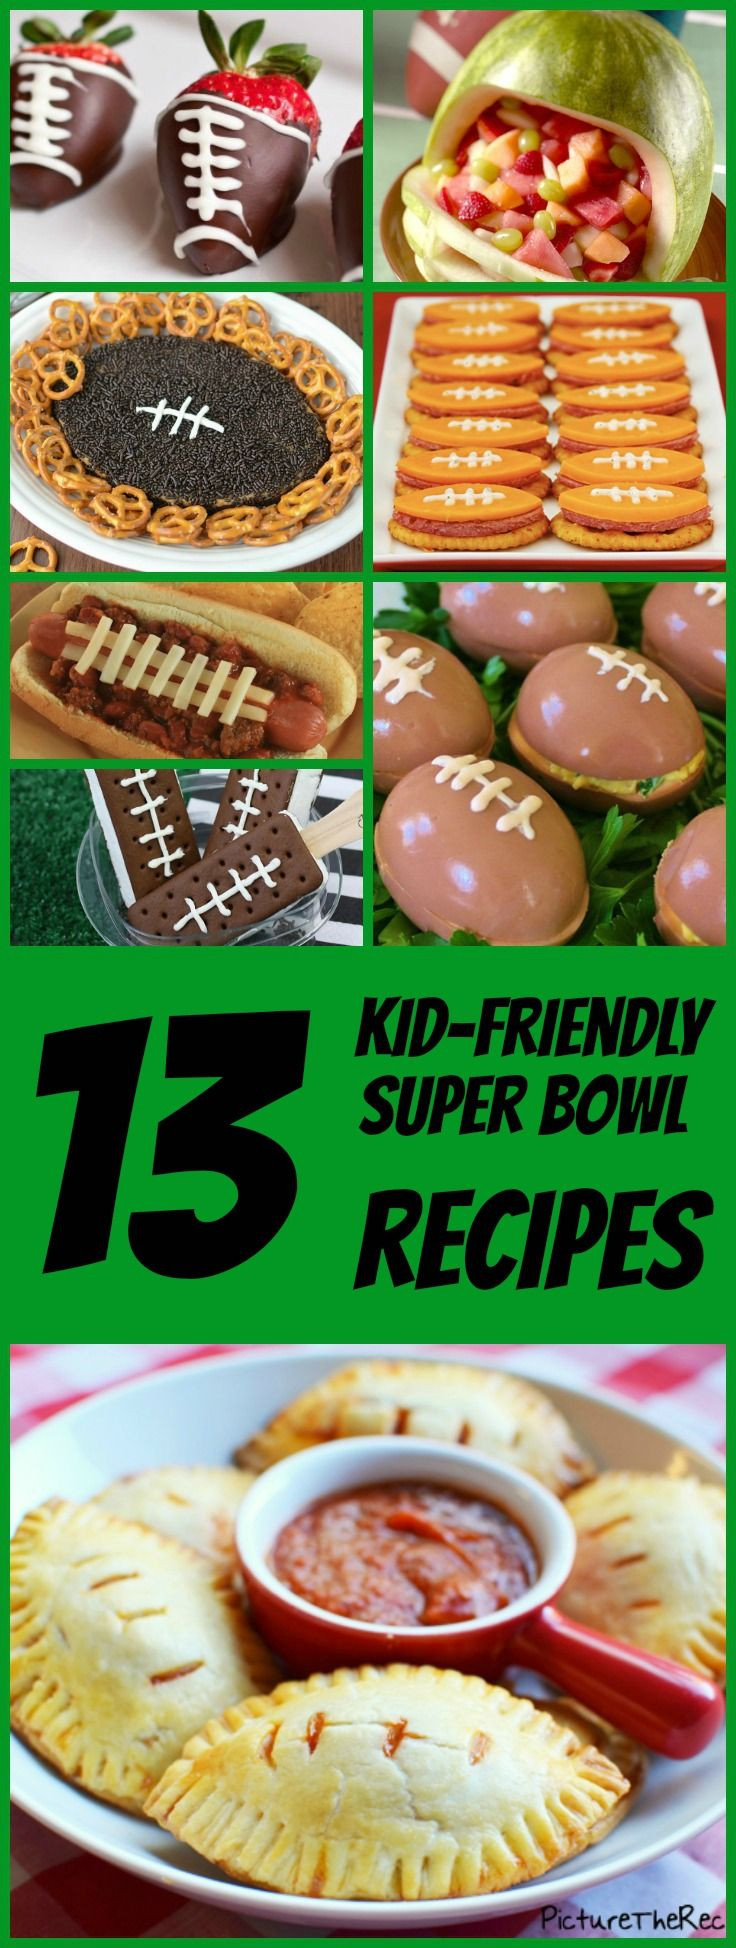 Kid Friendly Super Bowl Recipes
 238 best images about ♥Buckeye Babe♥ on Pinterest